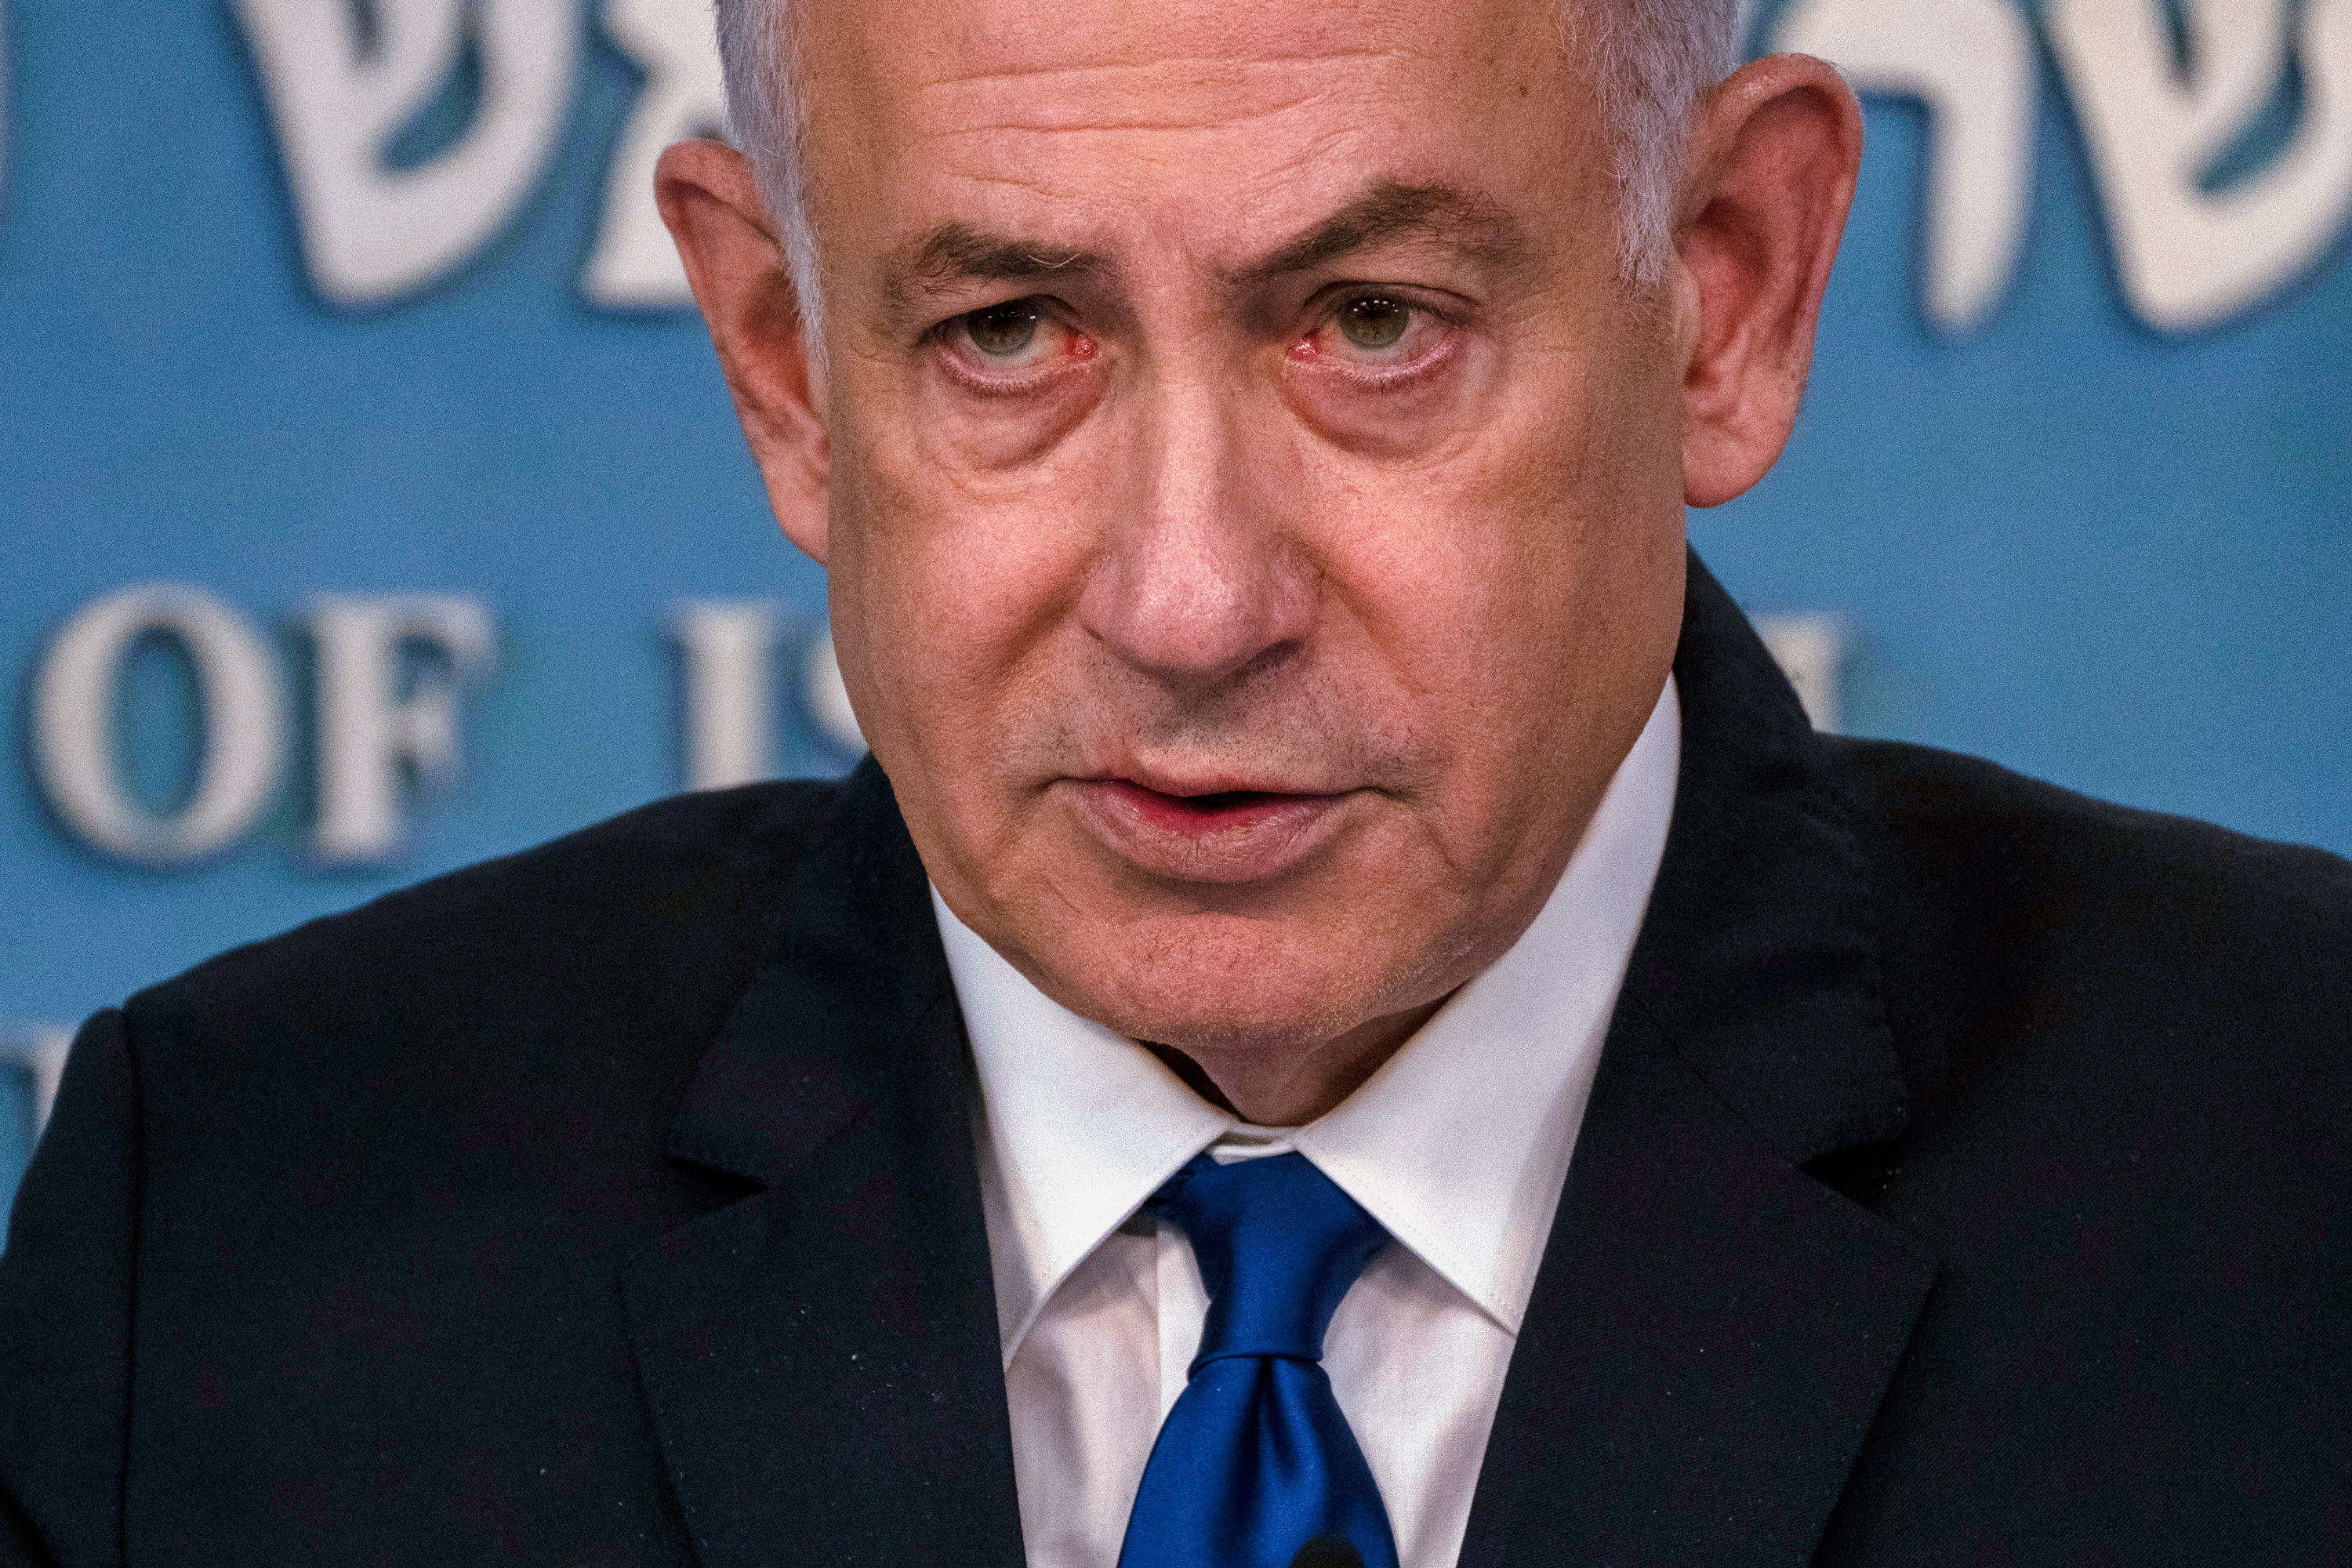 Netanyahu speaks during a press conference in Jerusalem on March 17.